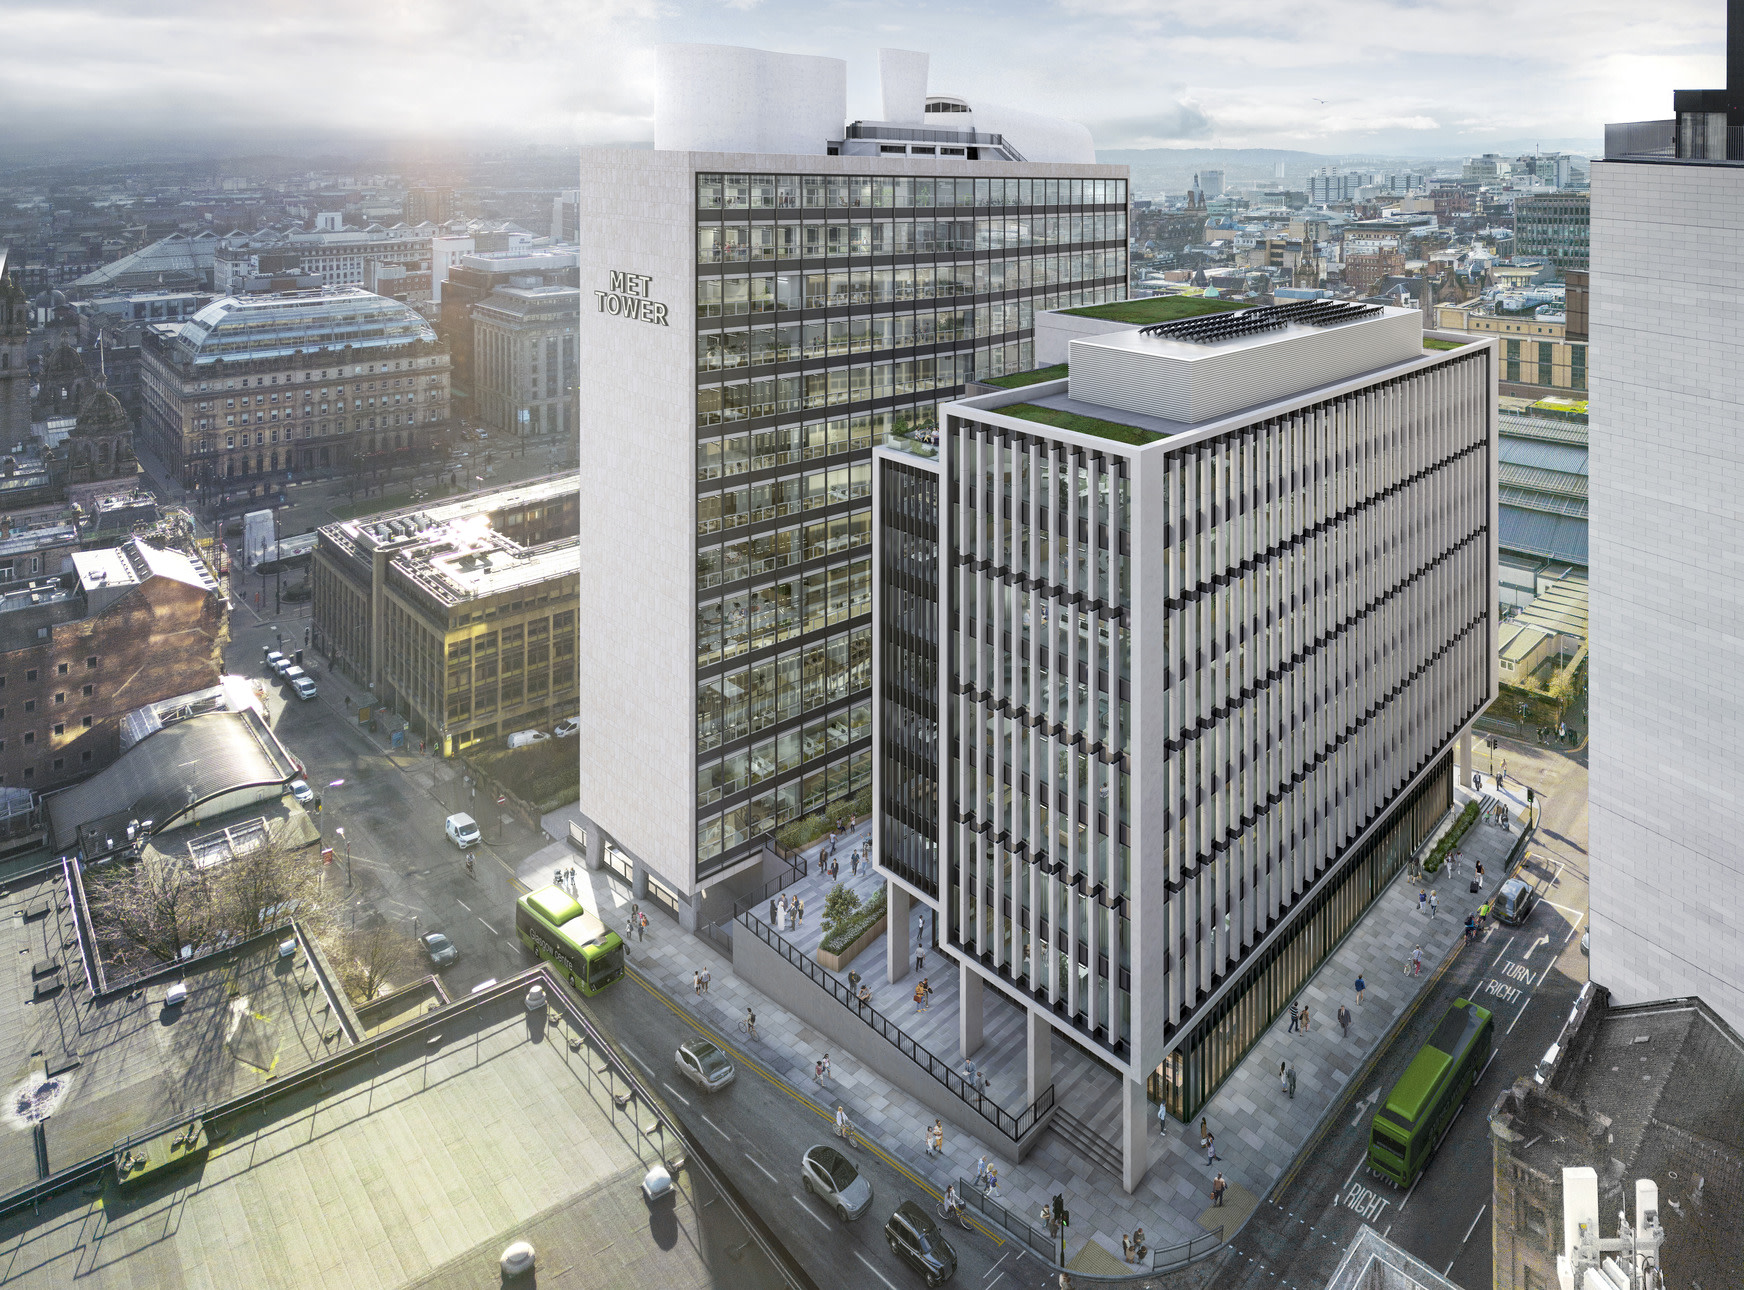 Bruntwood SciTech unveils £60m Met Tower vision as transformative plans submitted Image